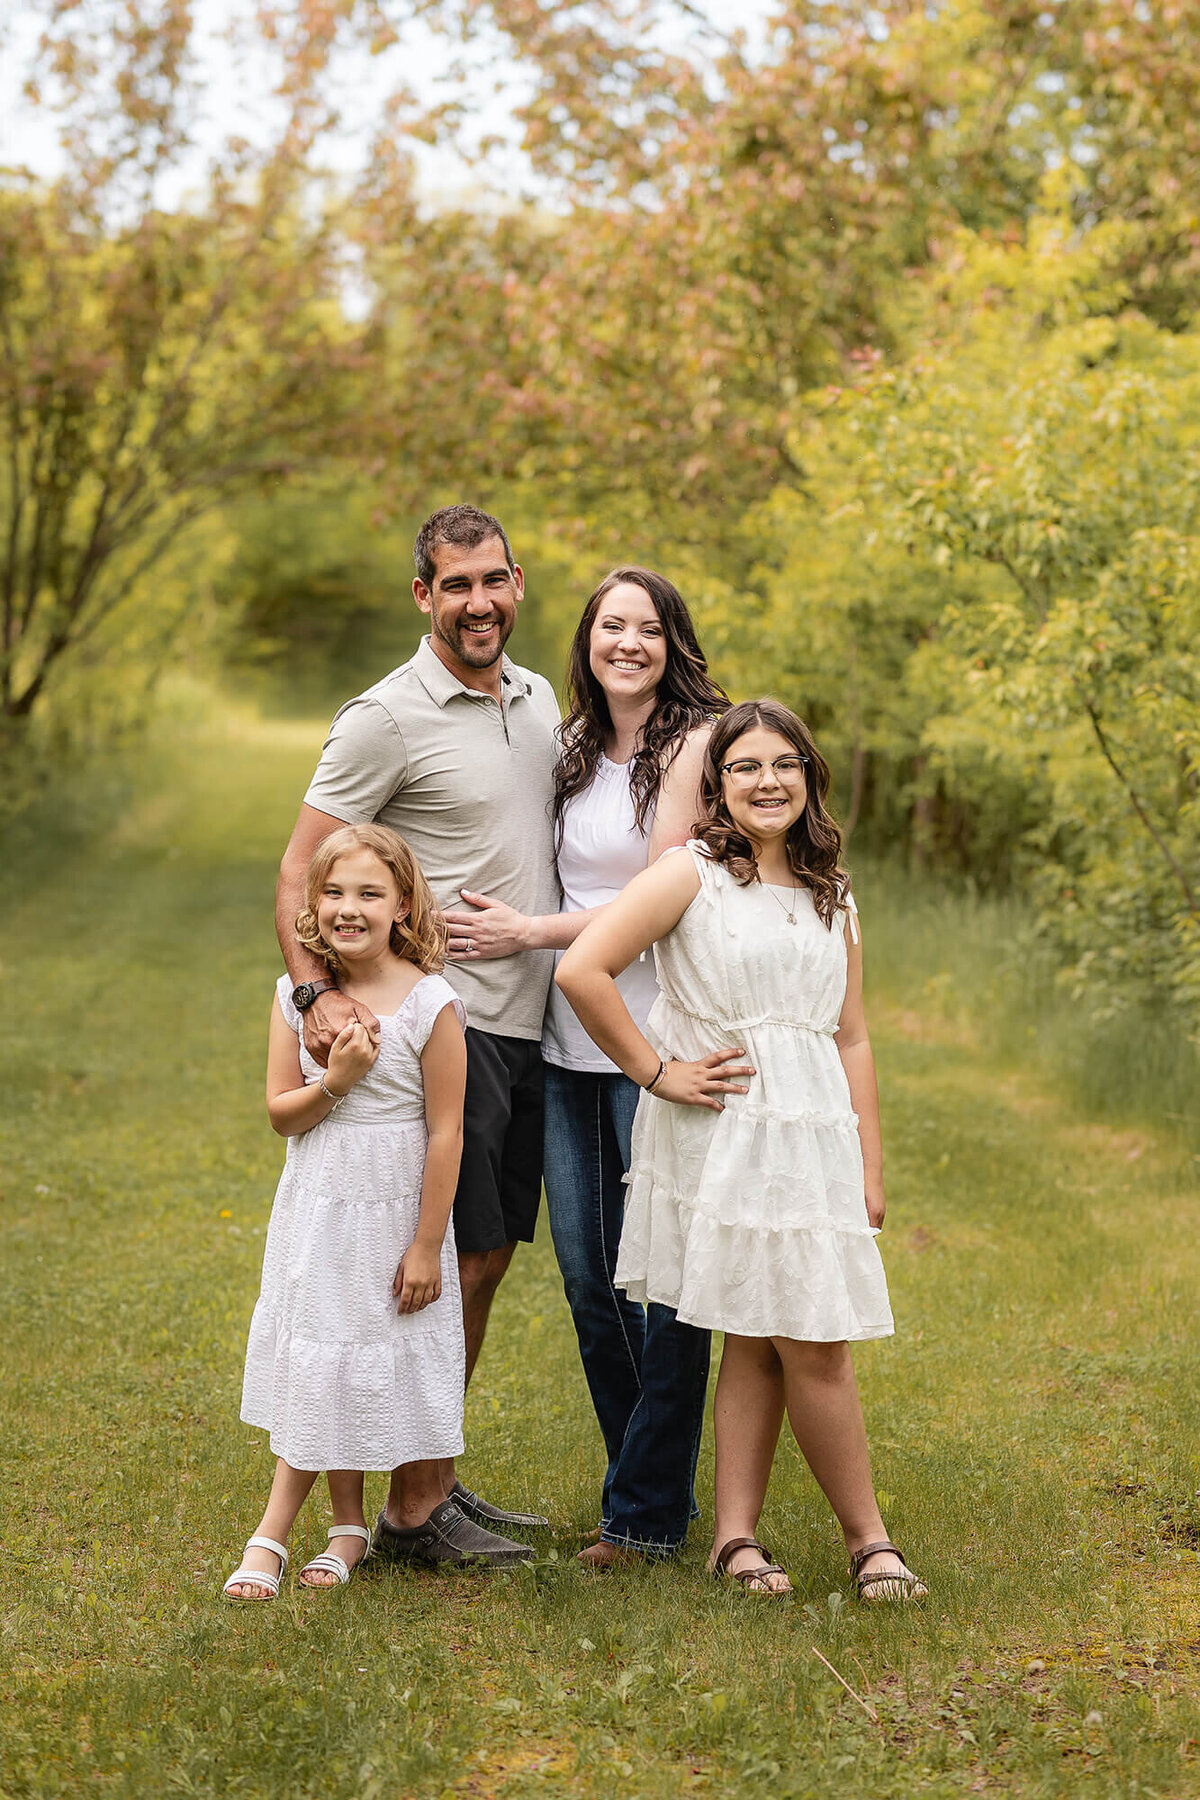 Beautiful family of four during their outdoor family photo session done by Jennifer Brandes Photography.